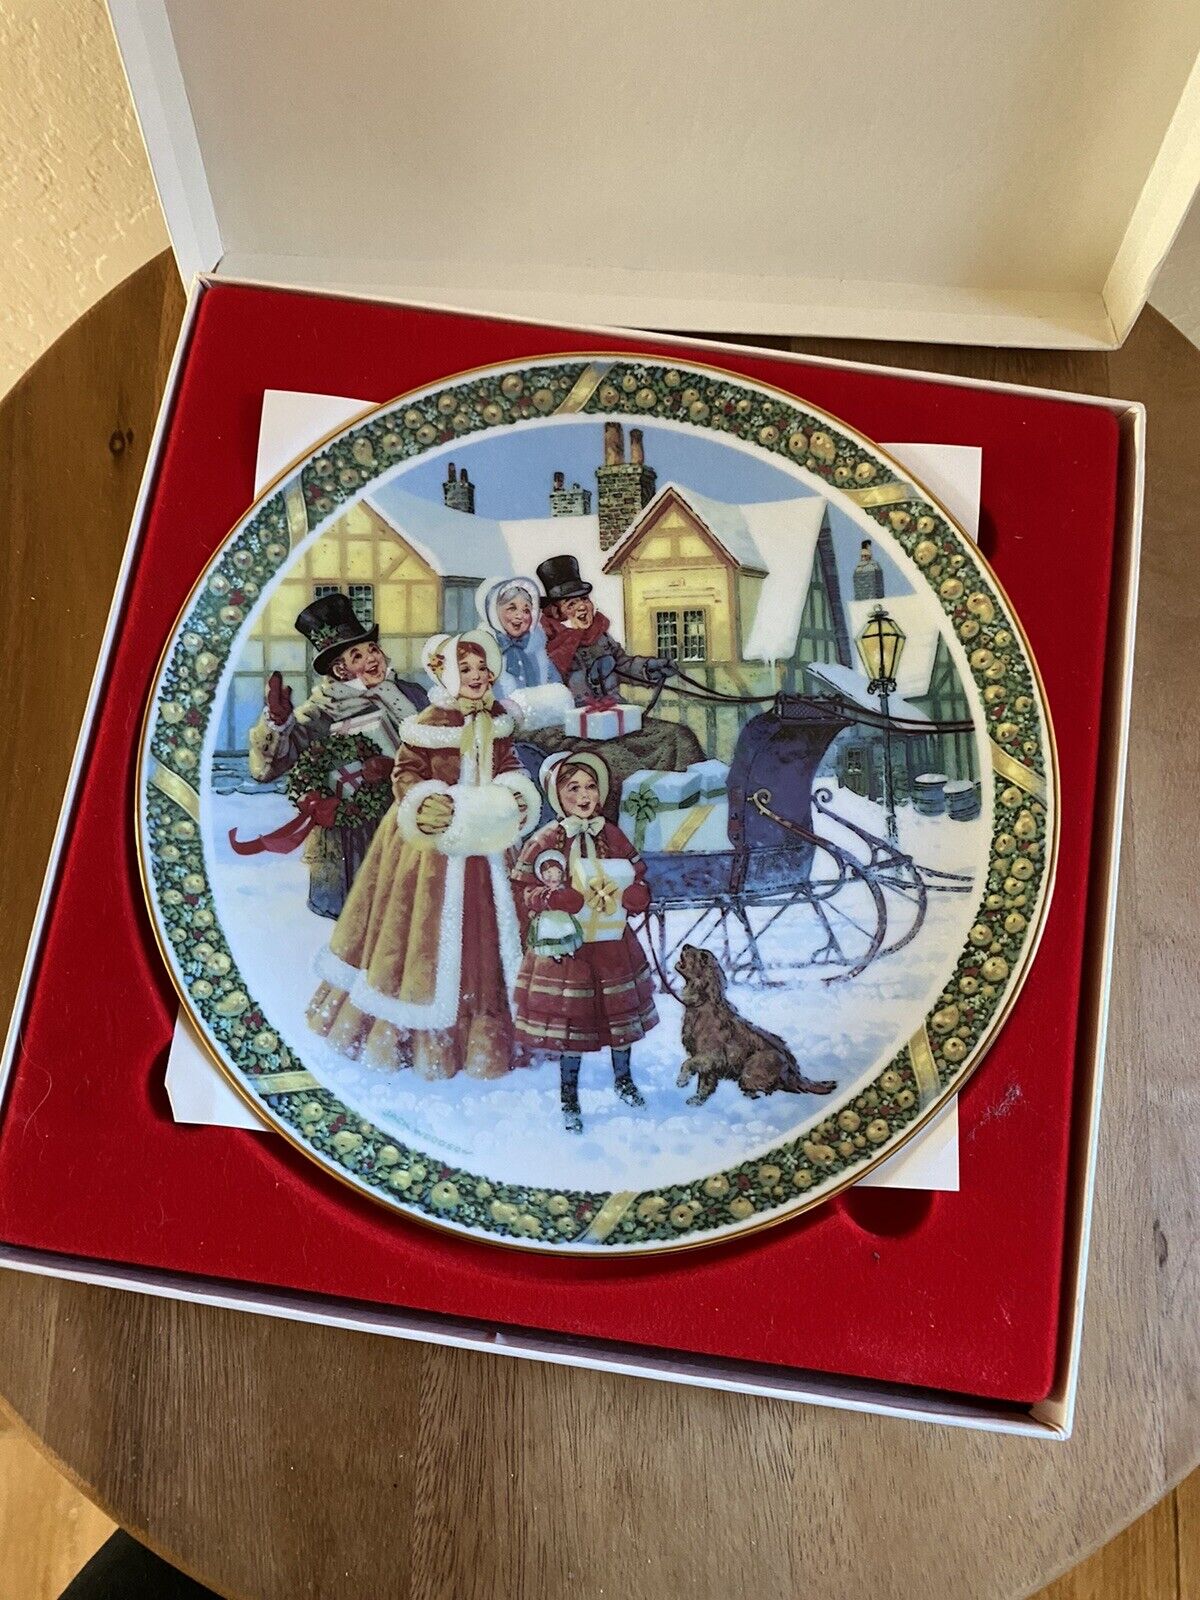 Royal Windsor “Here We Come A Caroling” Collectors Plate